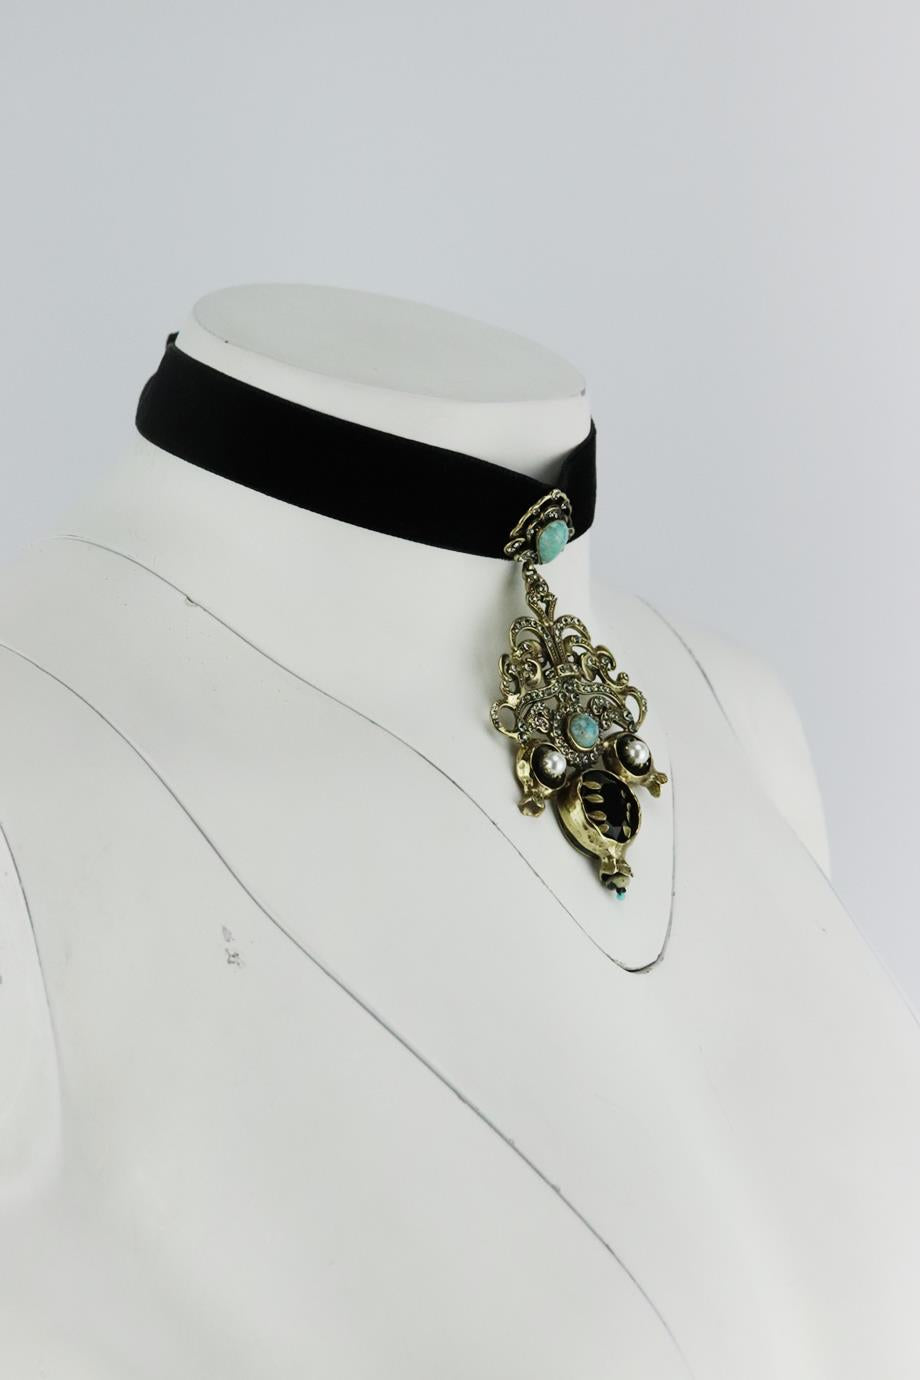 ETRO GOLD TONE CRYSTAL EMBELLISHED, ONYX AND FAUX PEARL VELVET CHOKER